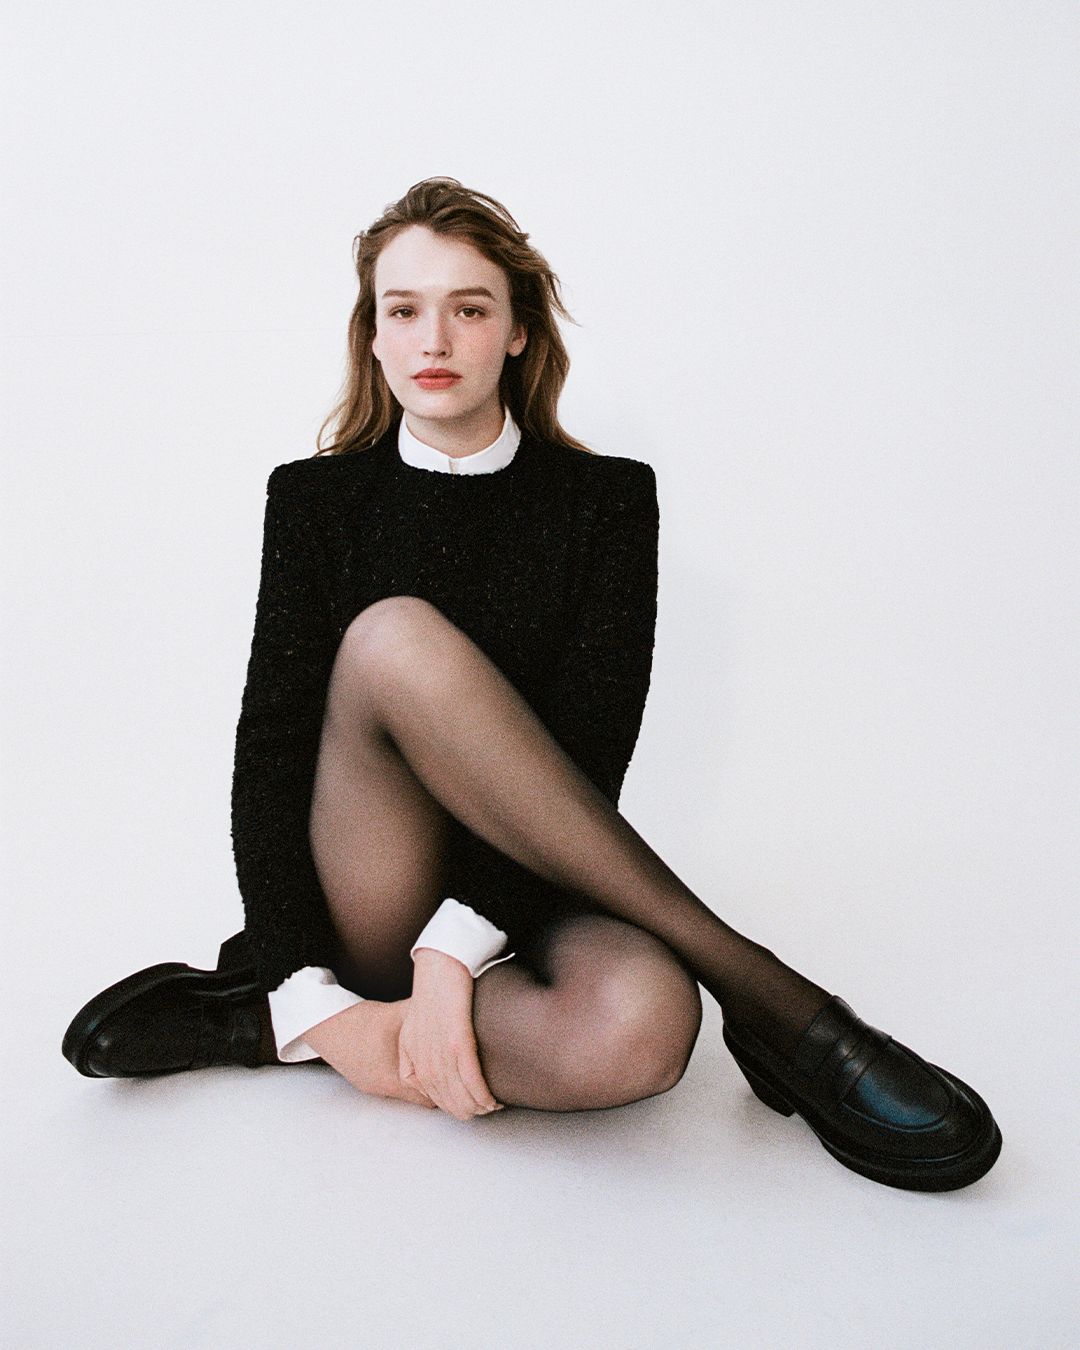 Maddison Brown sitting with legs crossed on the floor in black knitted top and white collared shirt